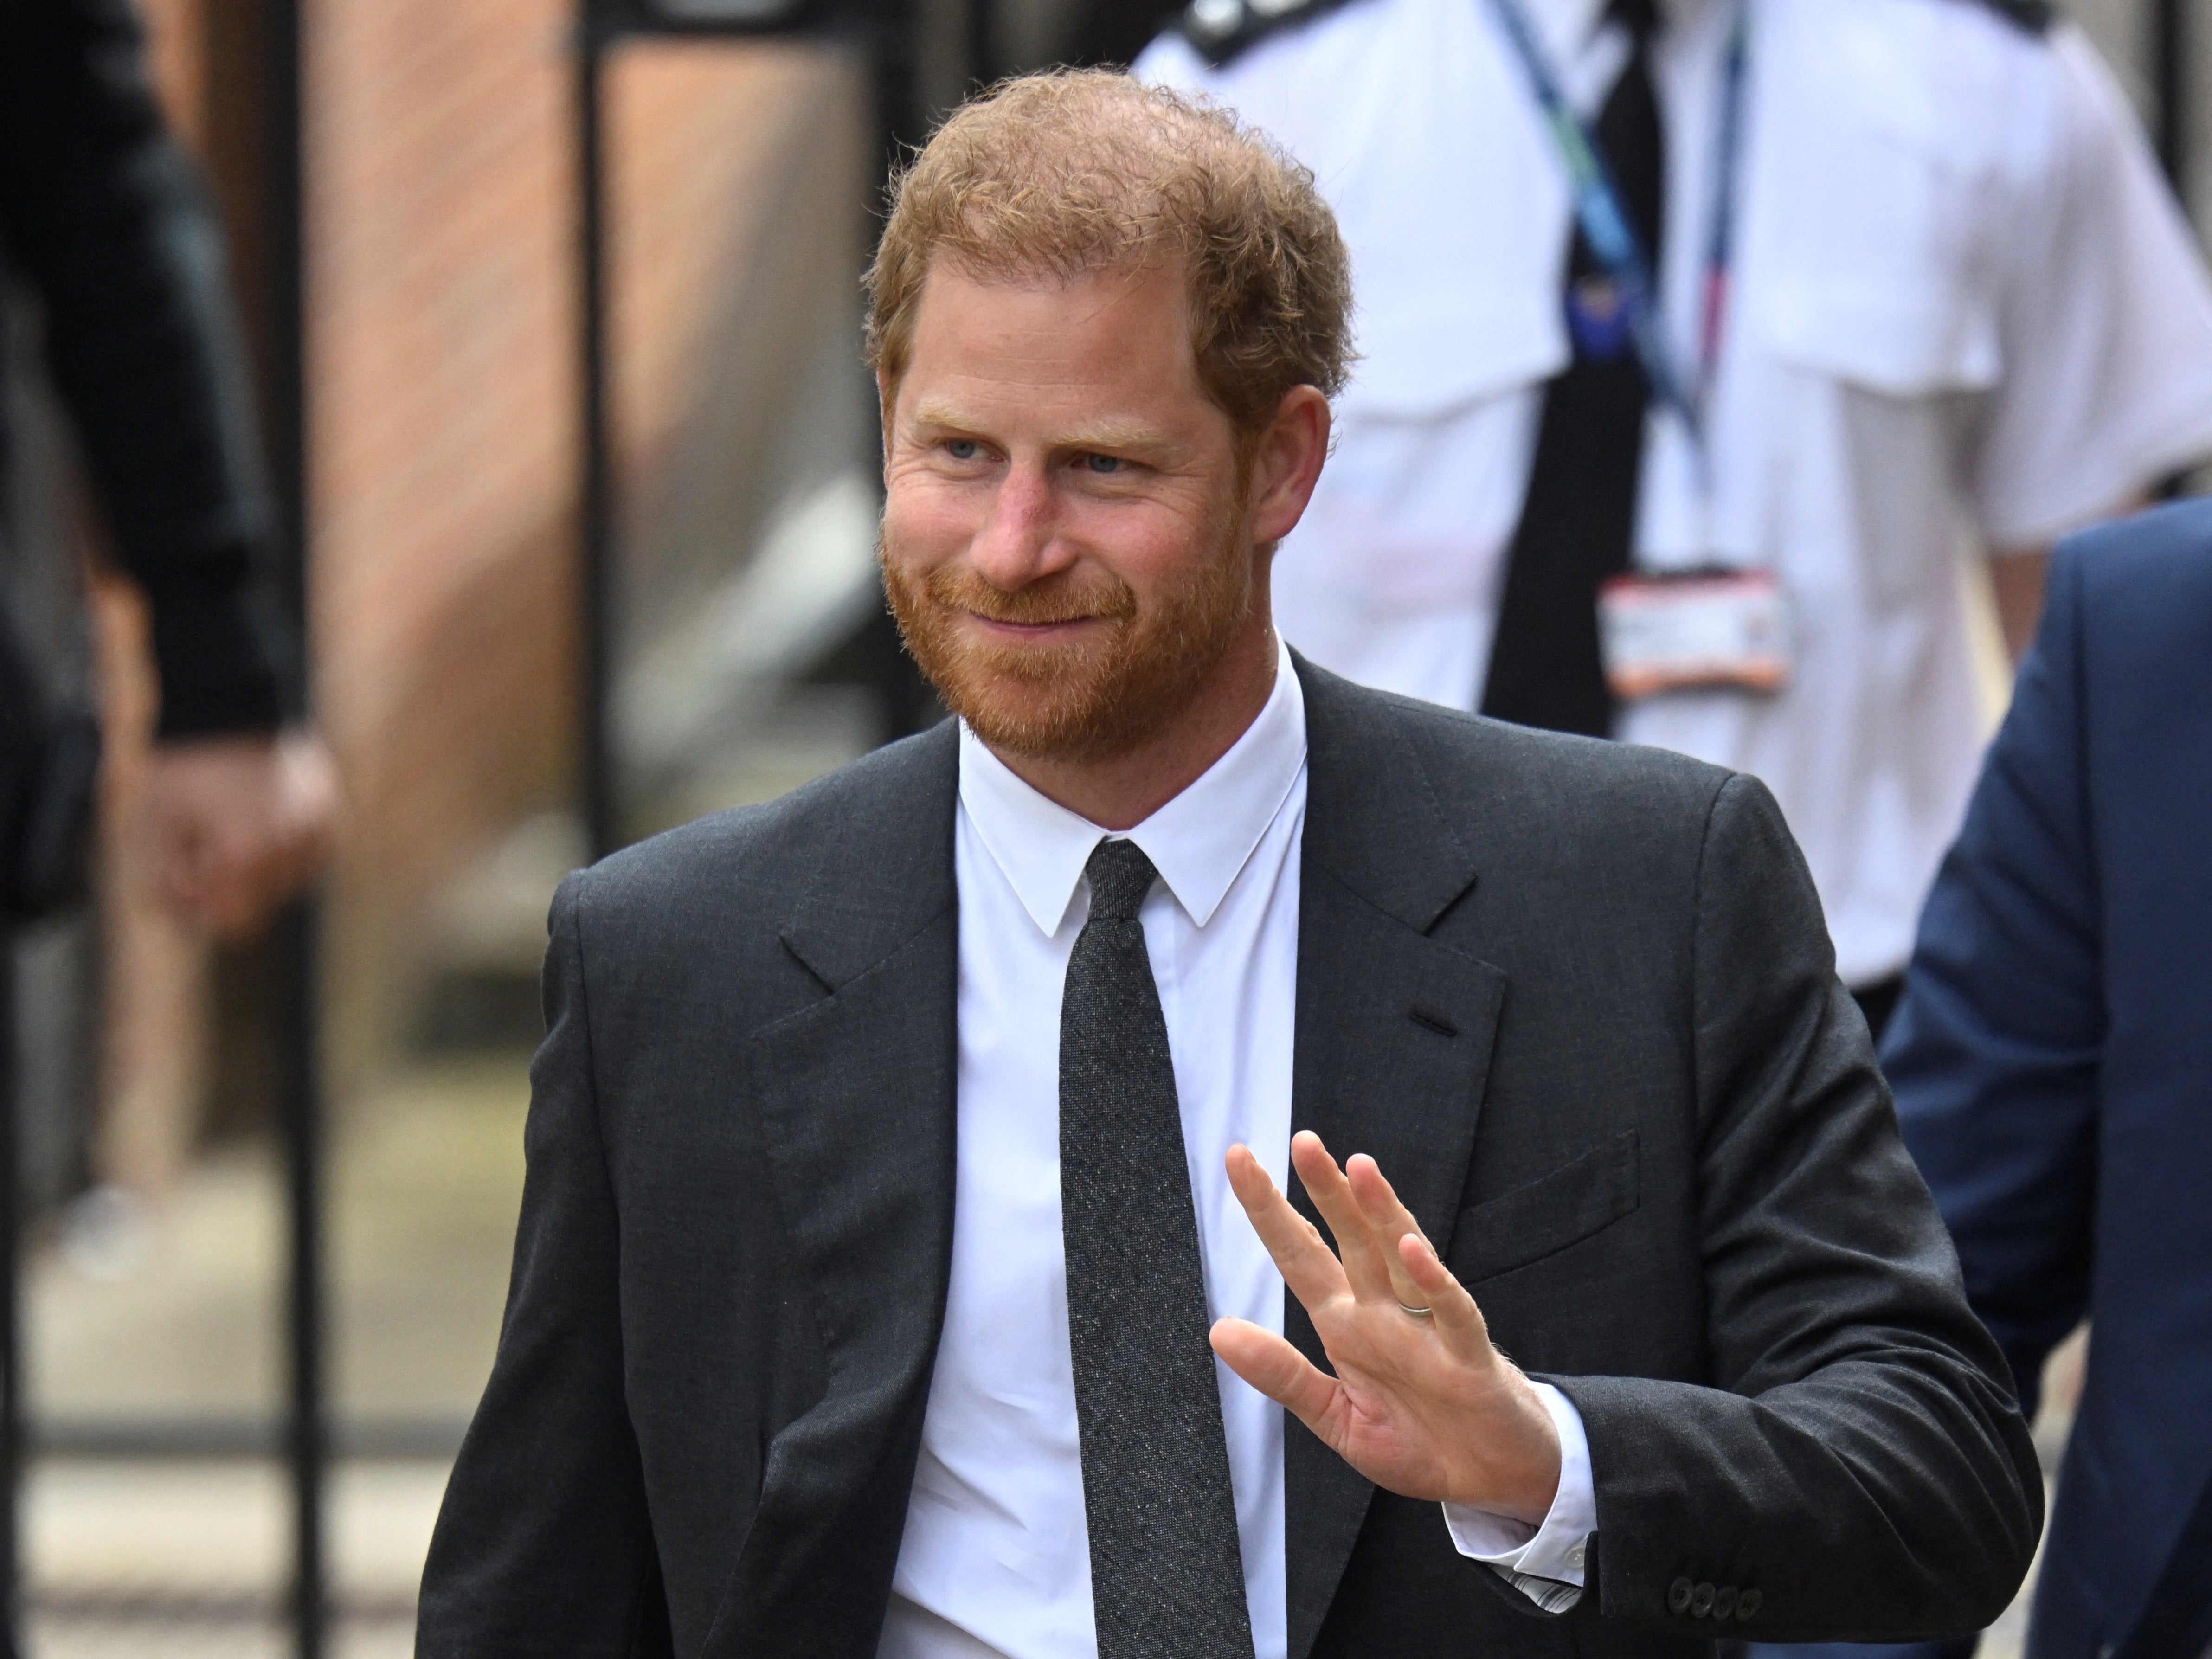 Prince Harry will attend his father’s coronation without his wife